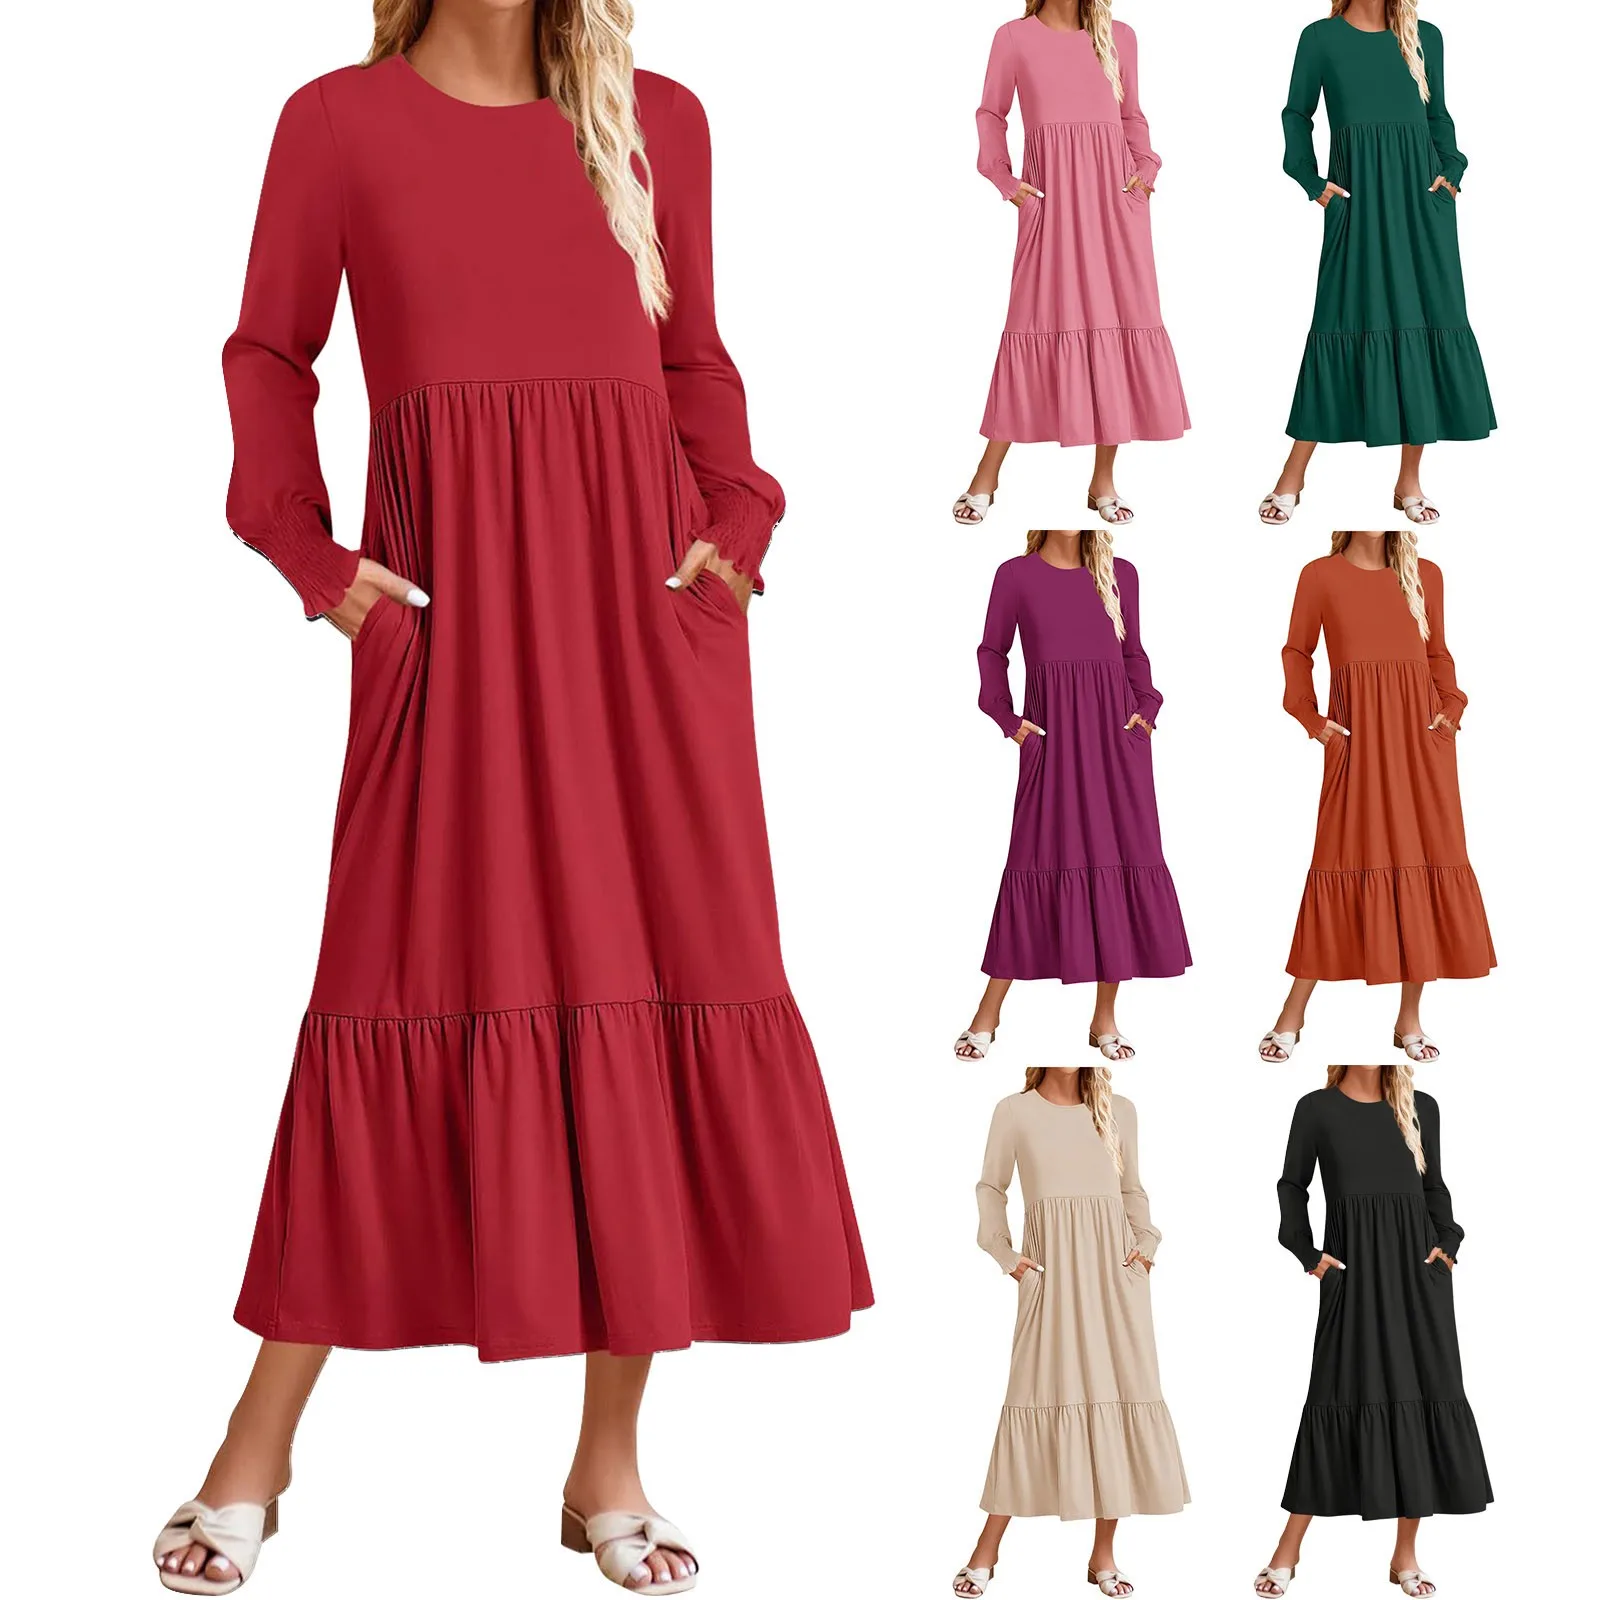 

Women's Casual Fashionable Dress Solid Color Long-Sleeved Smocked Layered Dress Temperament Long Swing Dress party dresses